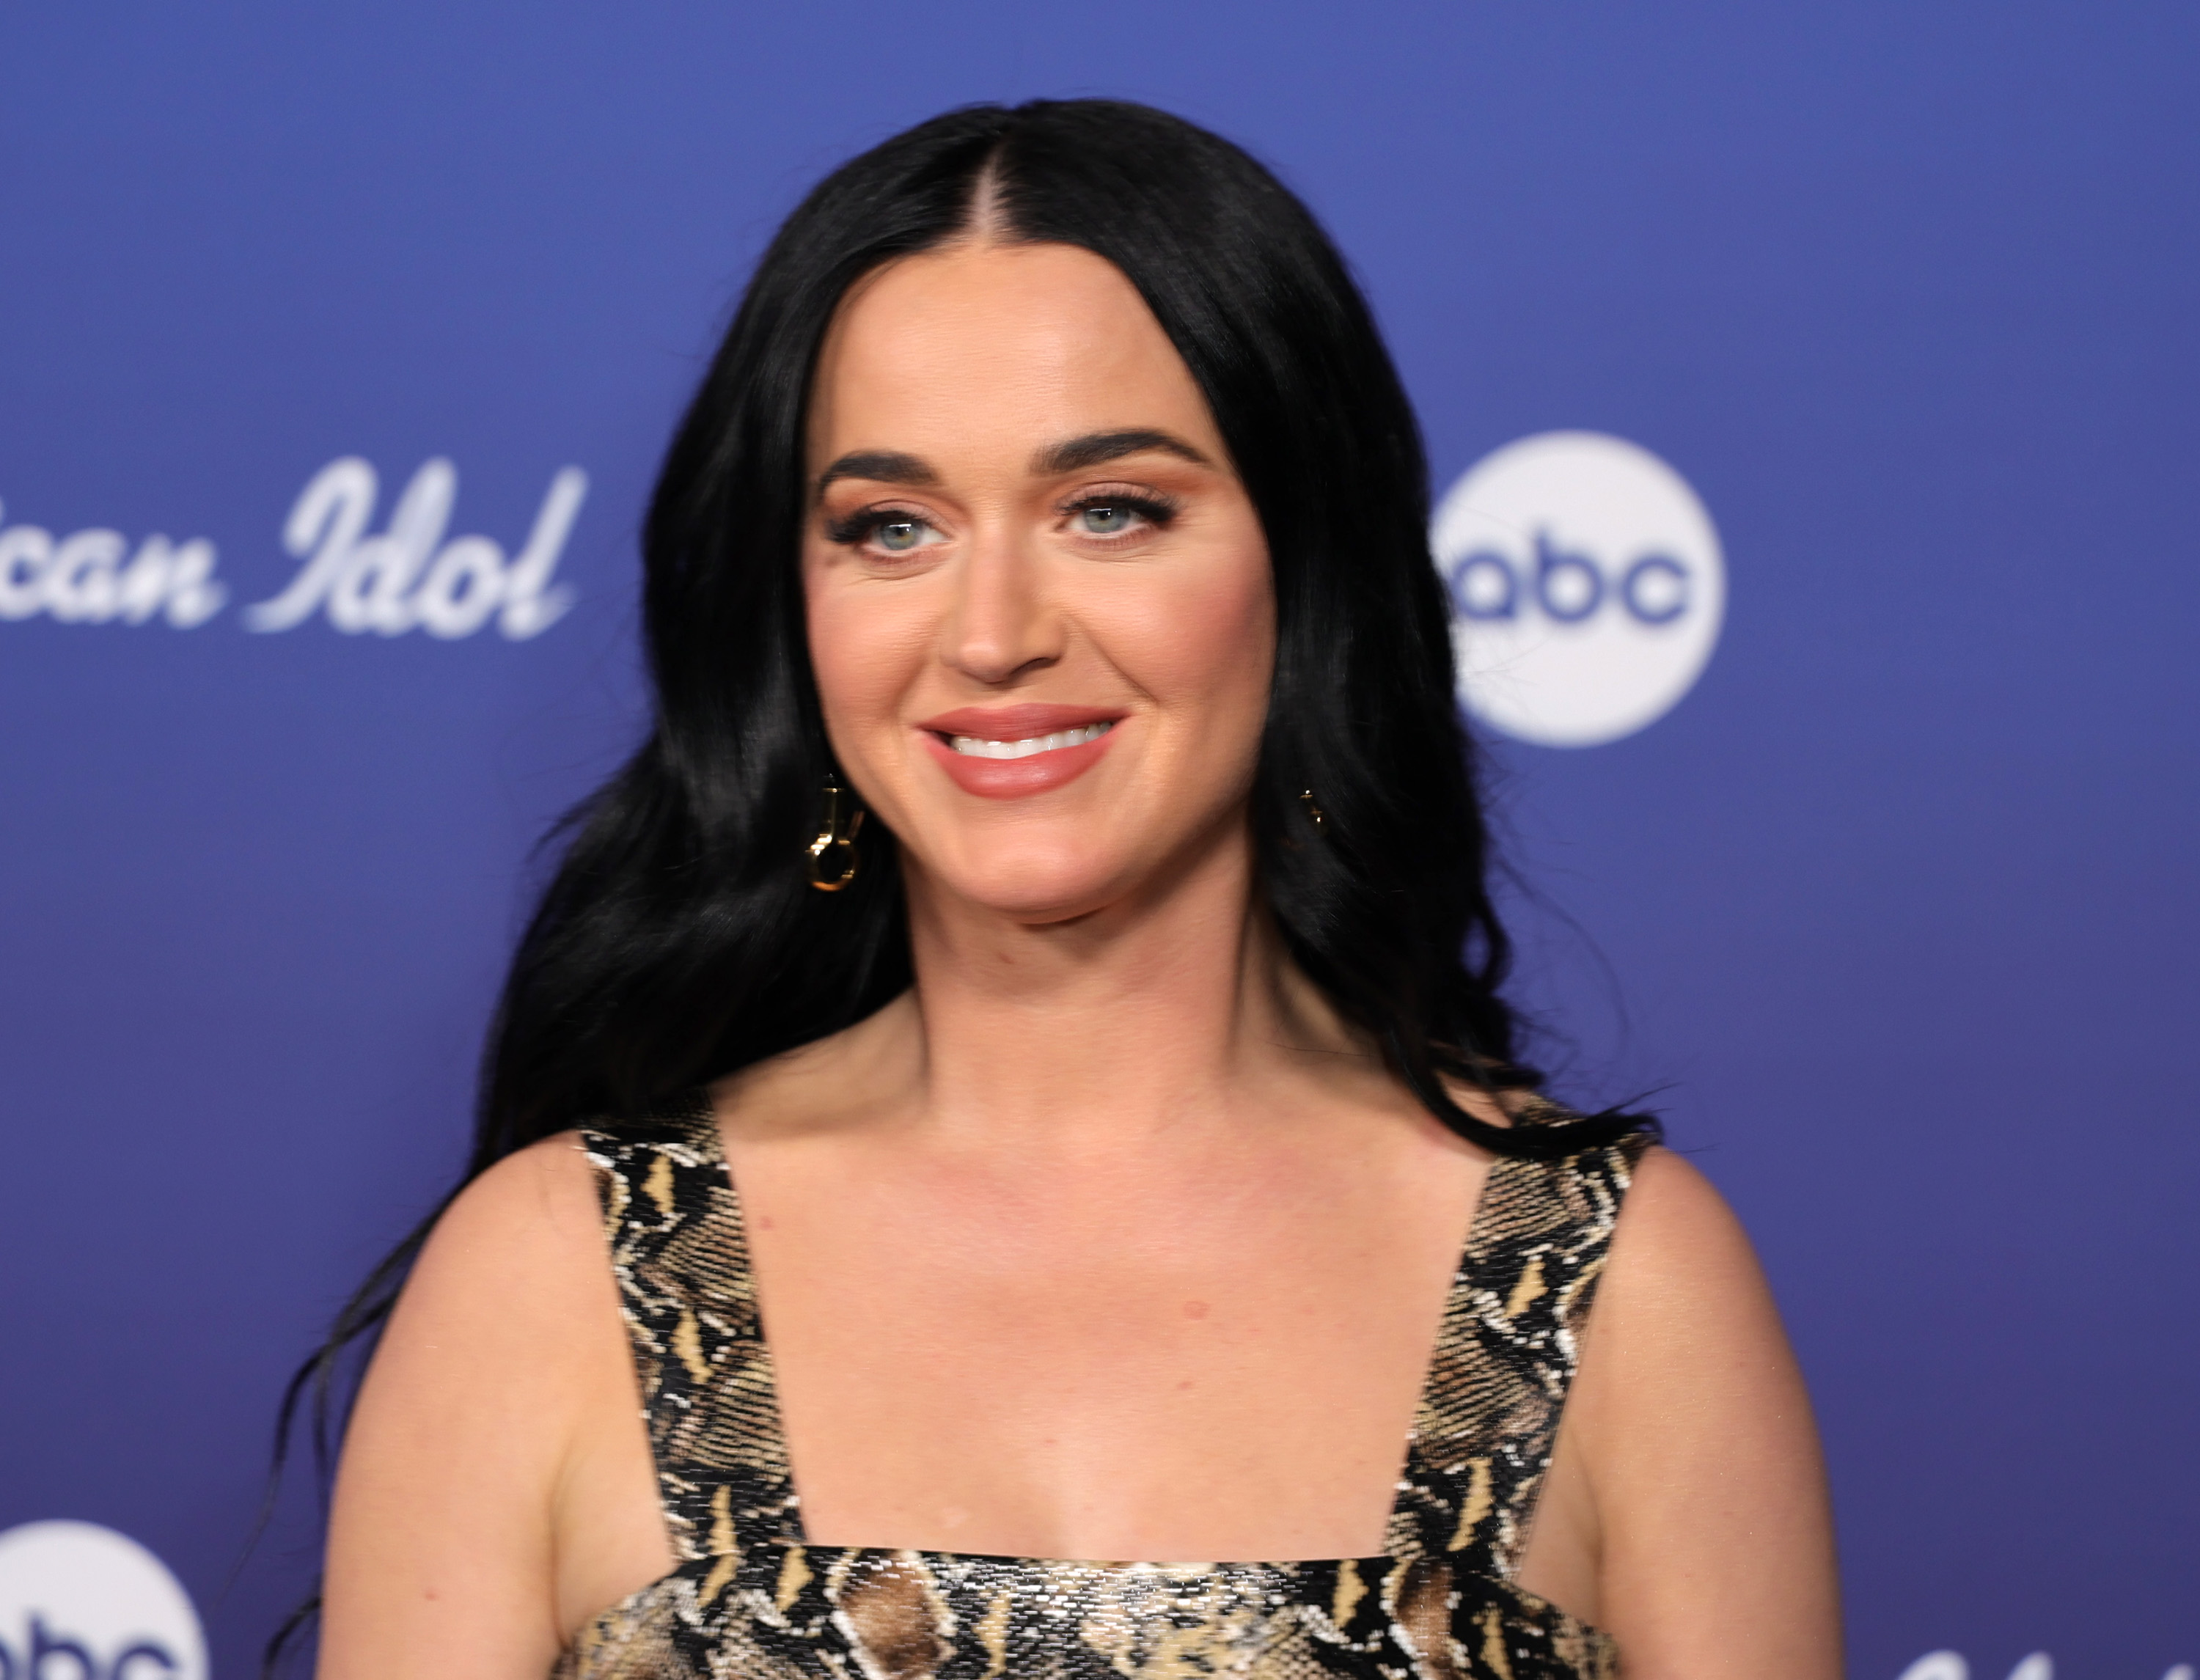 Katy Perry called out over Roe v Wade post amid Rick Caruso support: ‘Sit this one out’